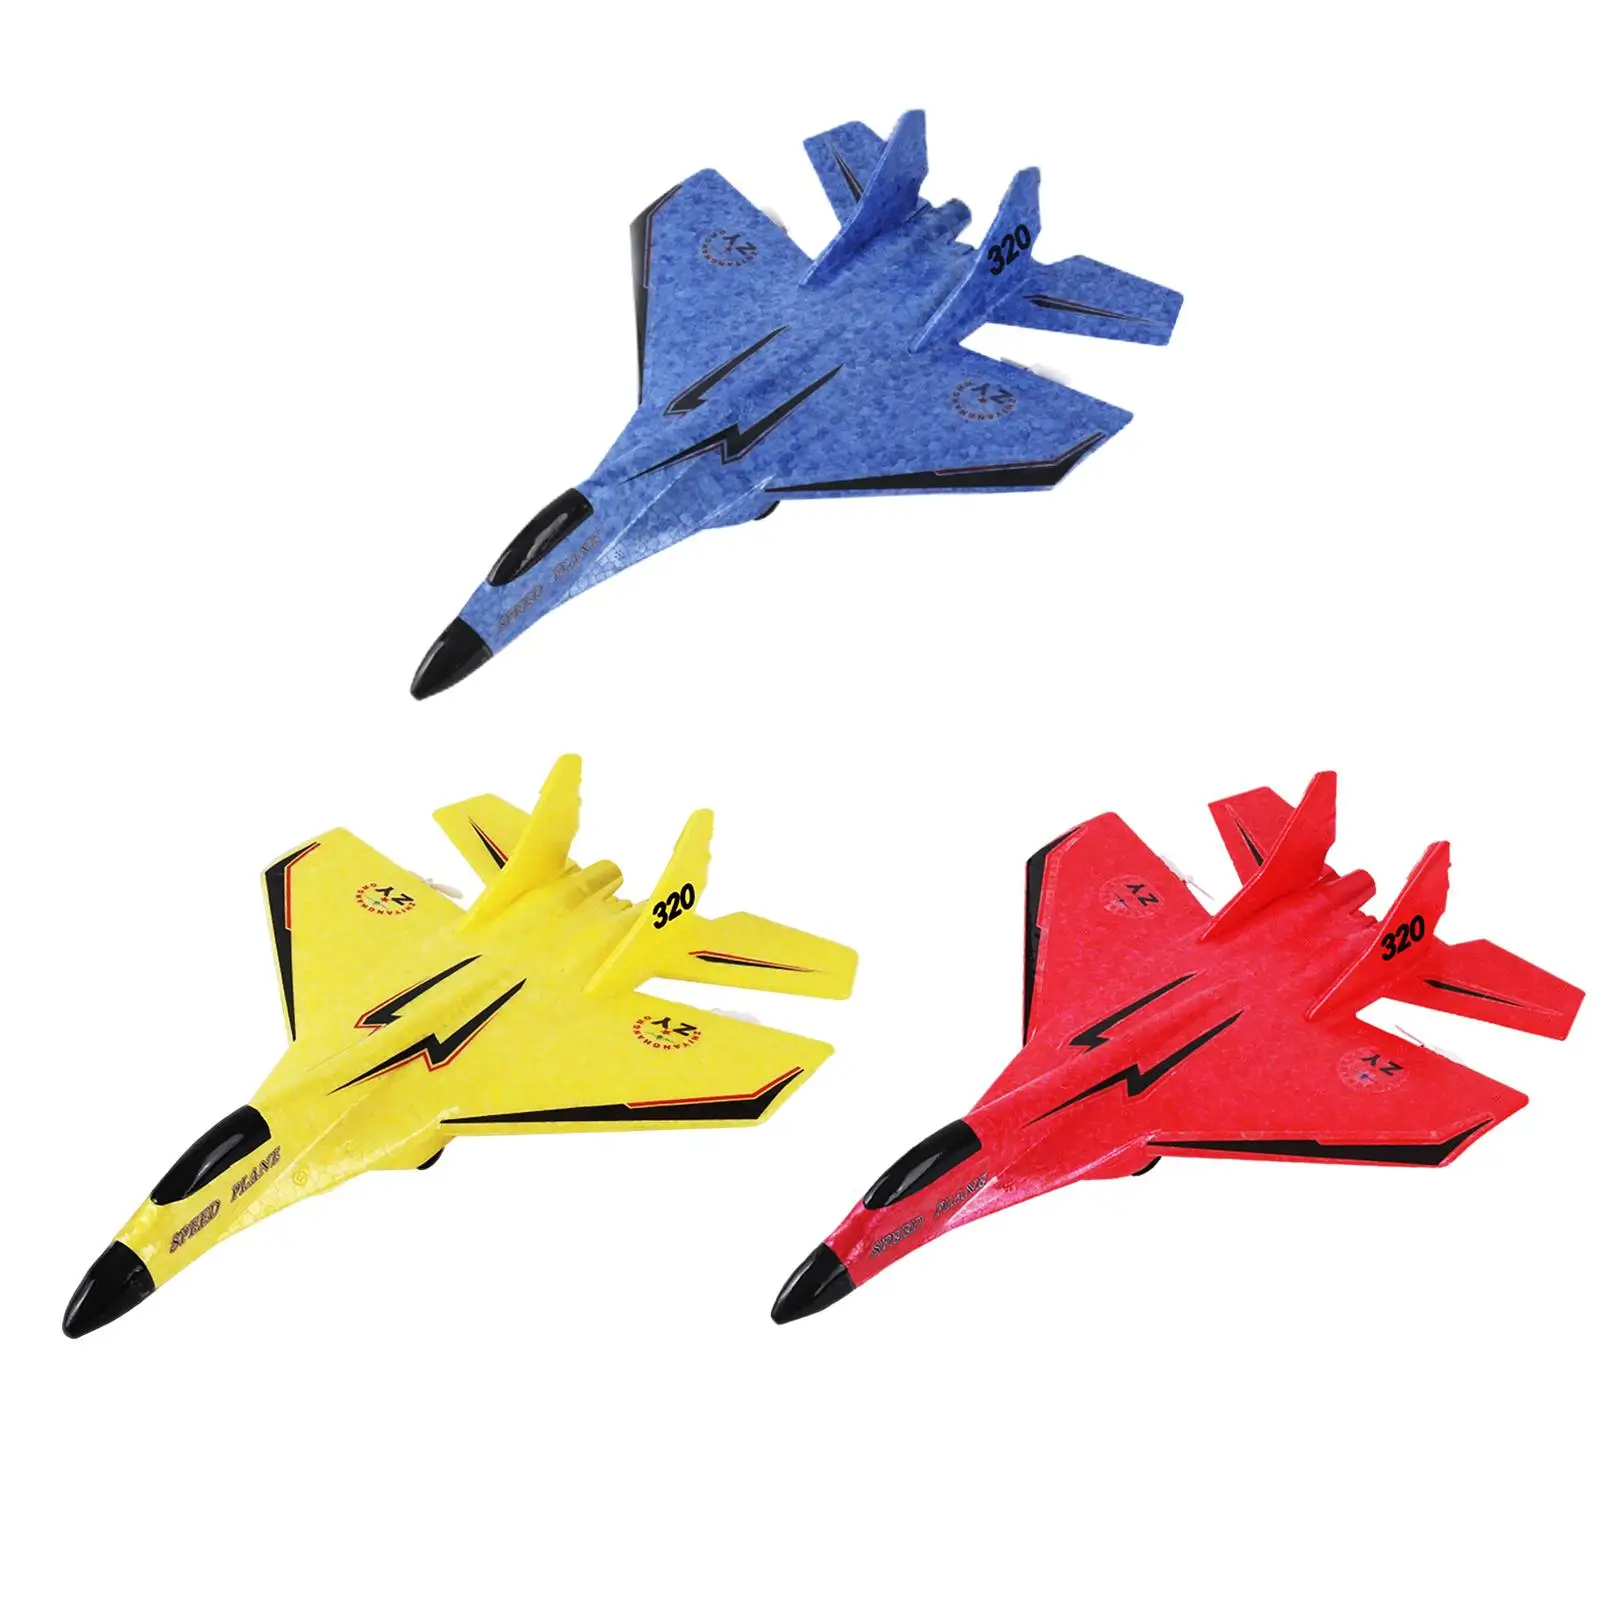 

RC Plane Lightweight Outdoor Flighting Toys Ready to Fly Fighter Toys RC Aircraft Jet Hobby RC Glider for Adults Beginner